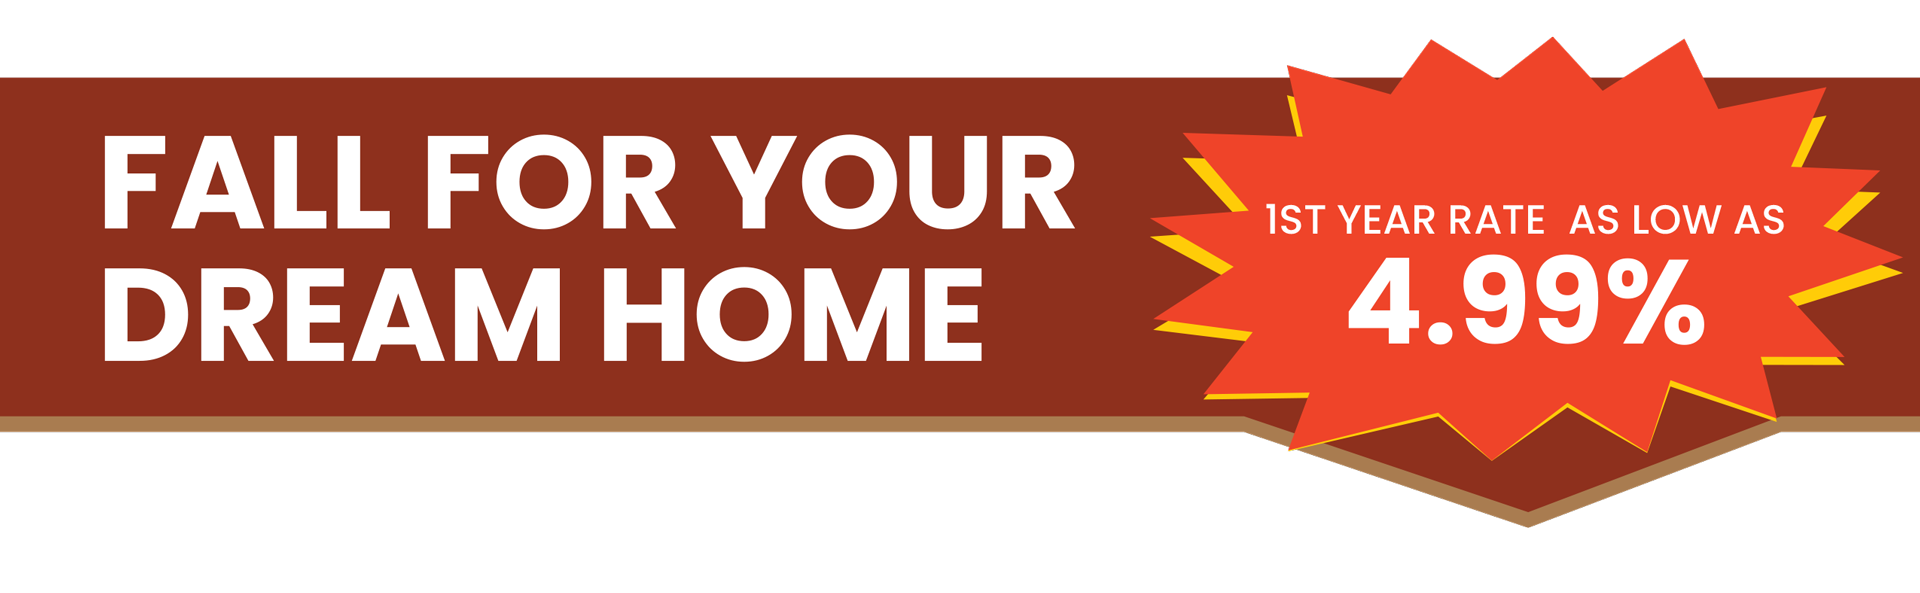 Fall For Your Dream Home Banner